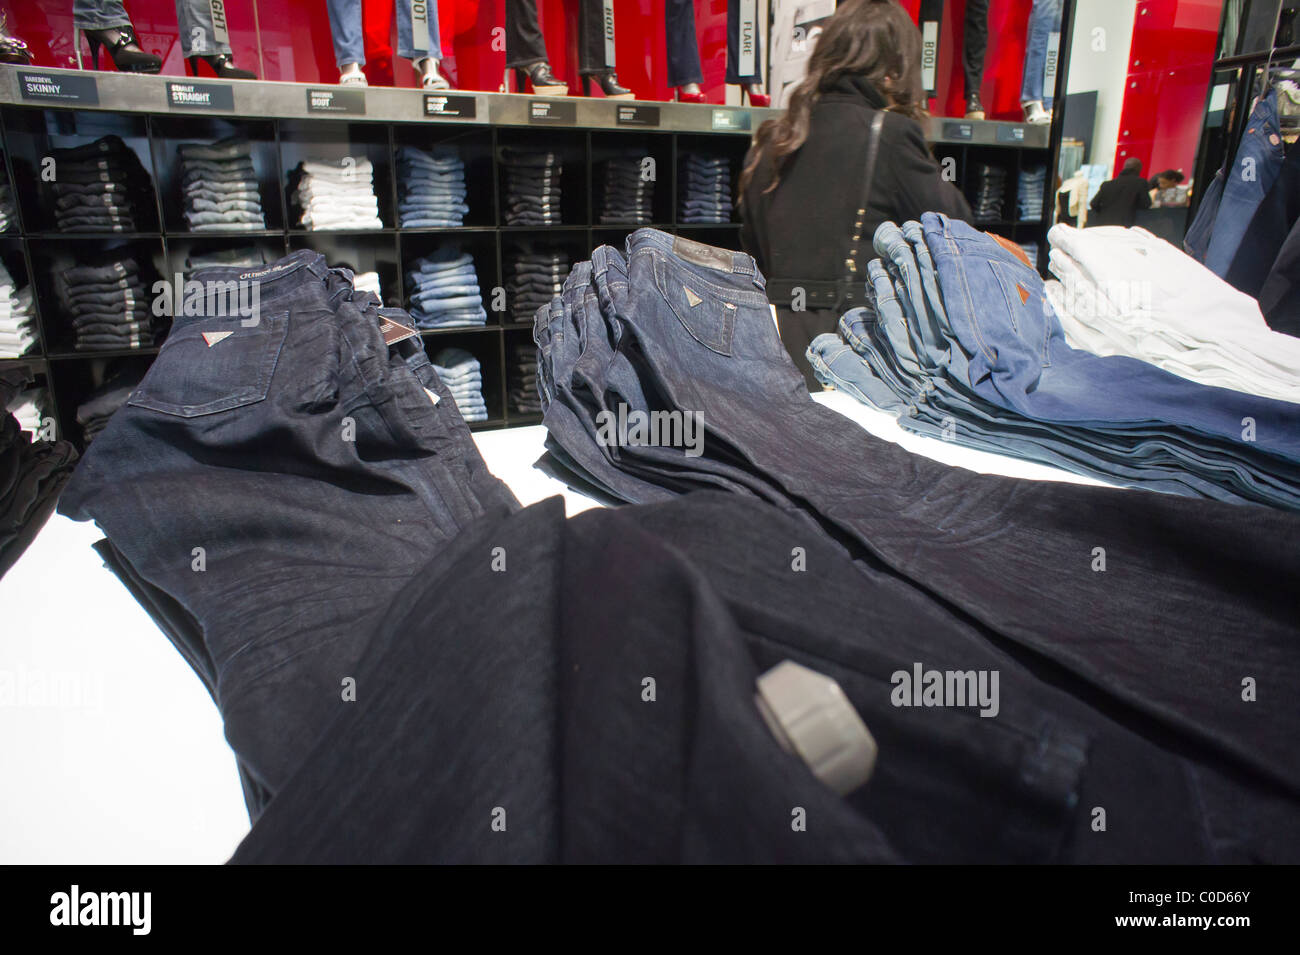 Guess Clothing Store High Resolution Stock Photography and Images - Alamy